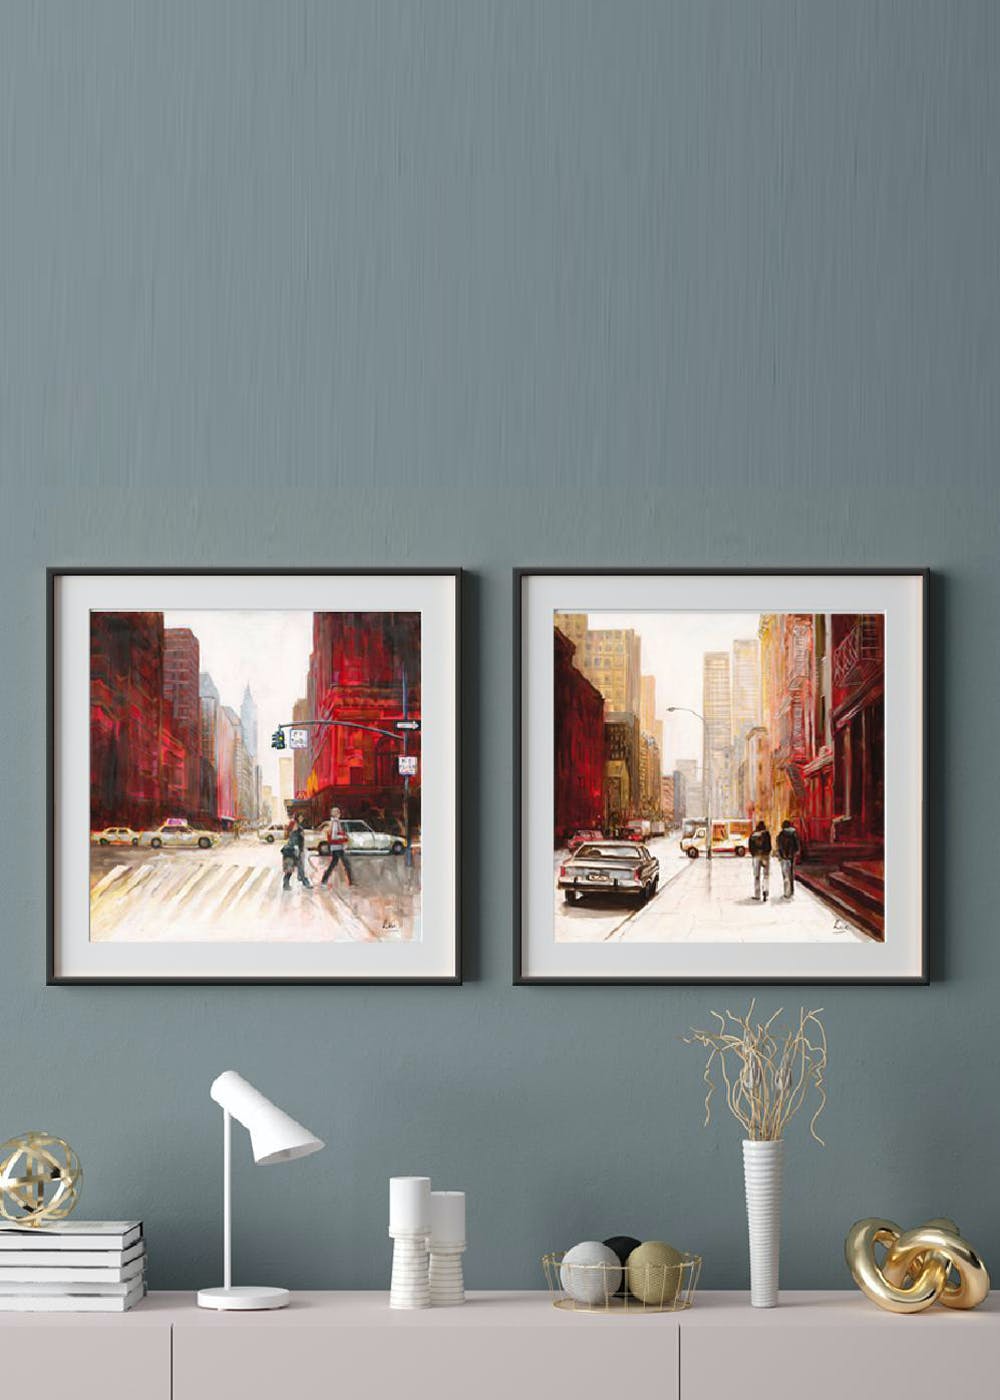 Framed Wall Art on Paper, Titled: Dissolving Red City |  Set of 2 | 13 X 13 inch each